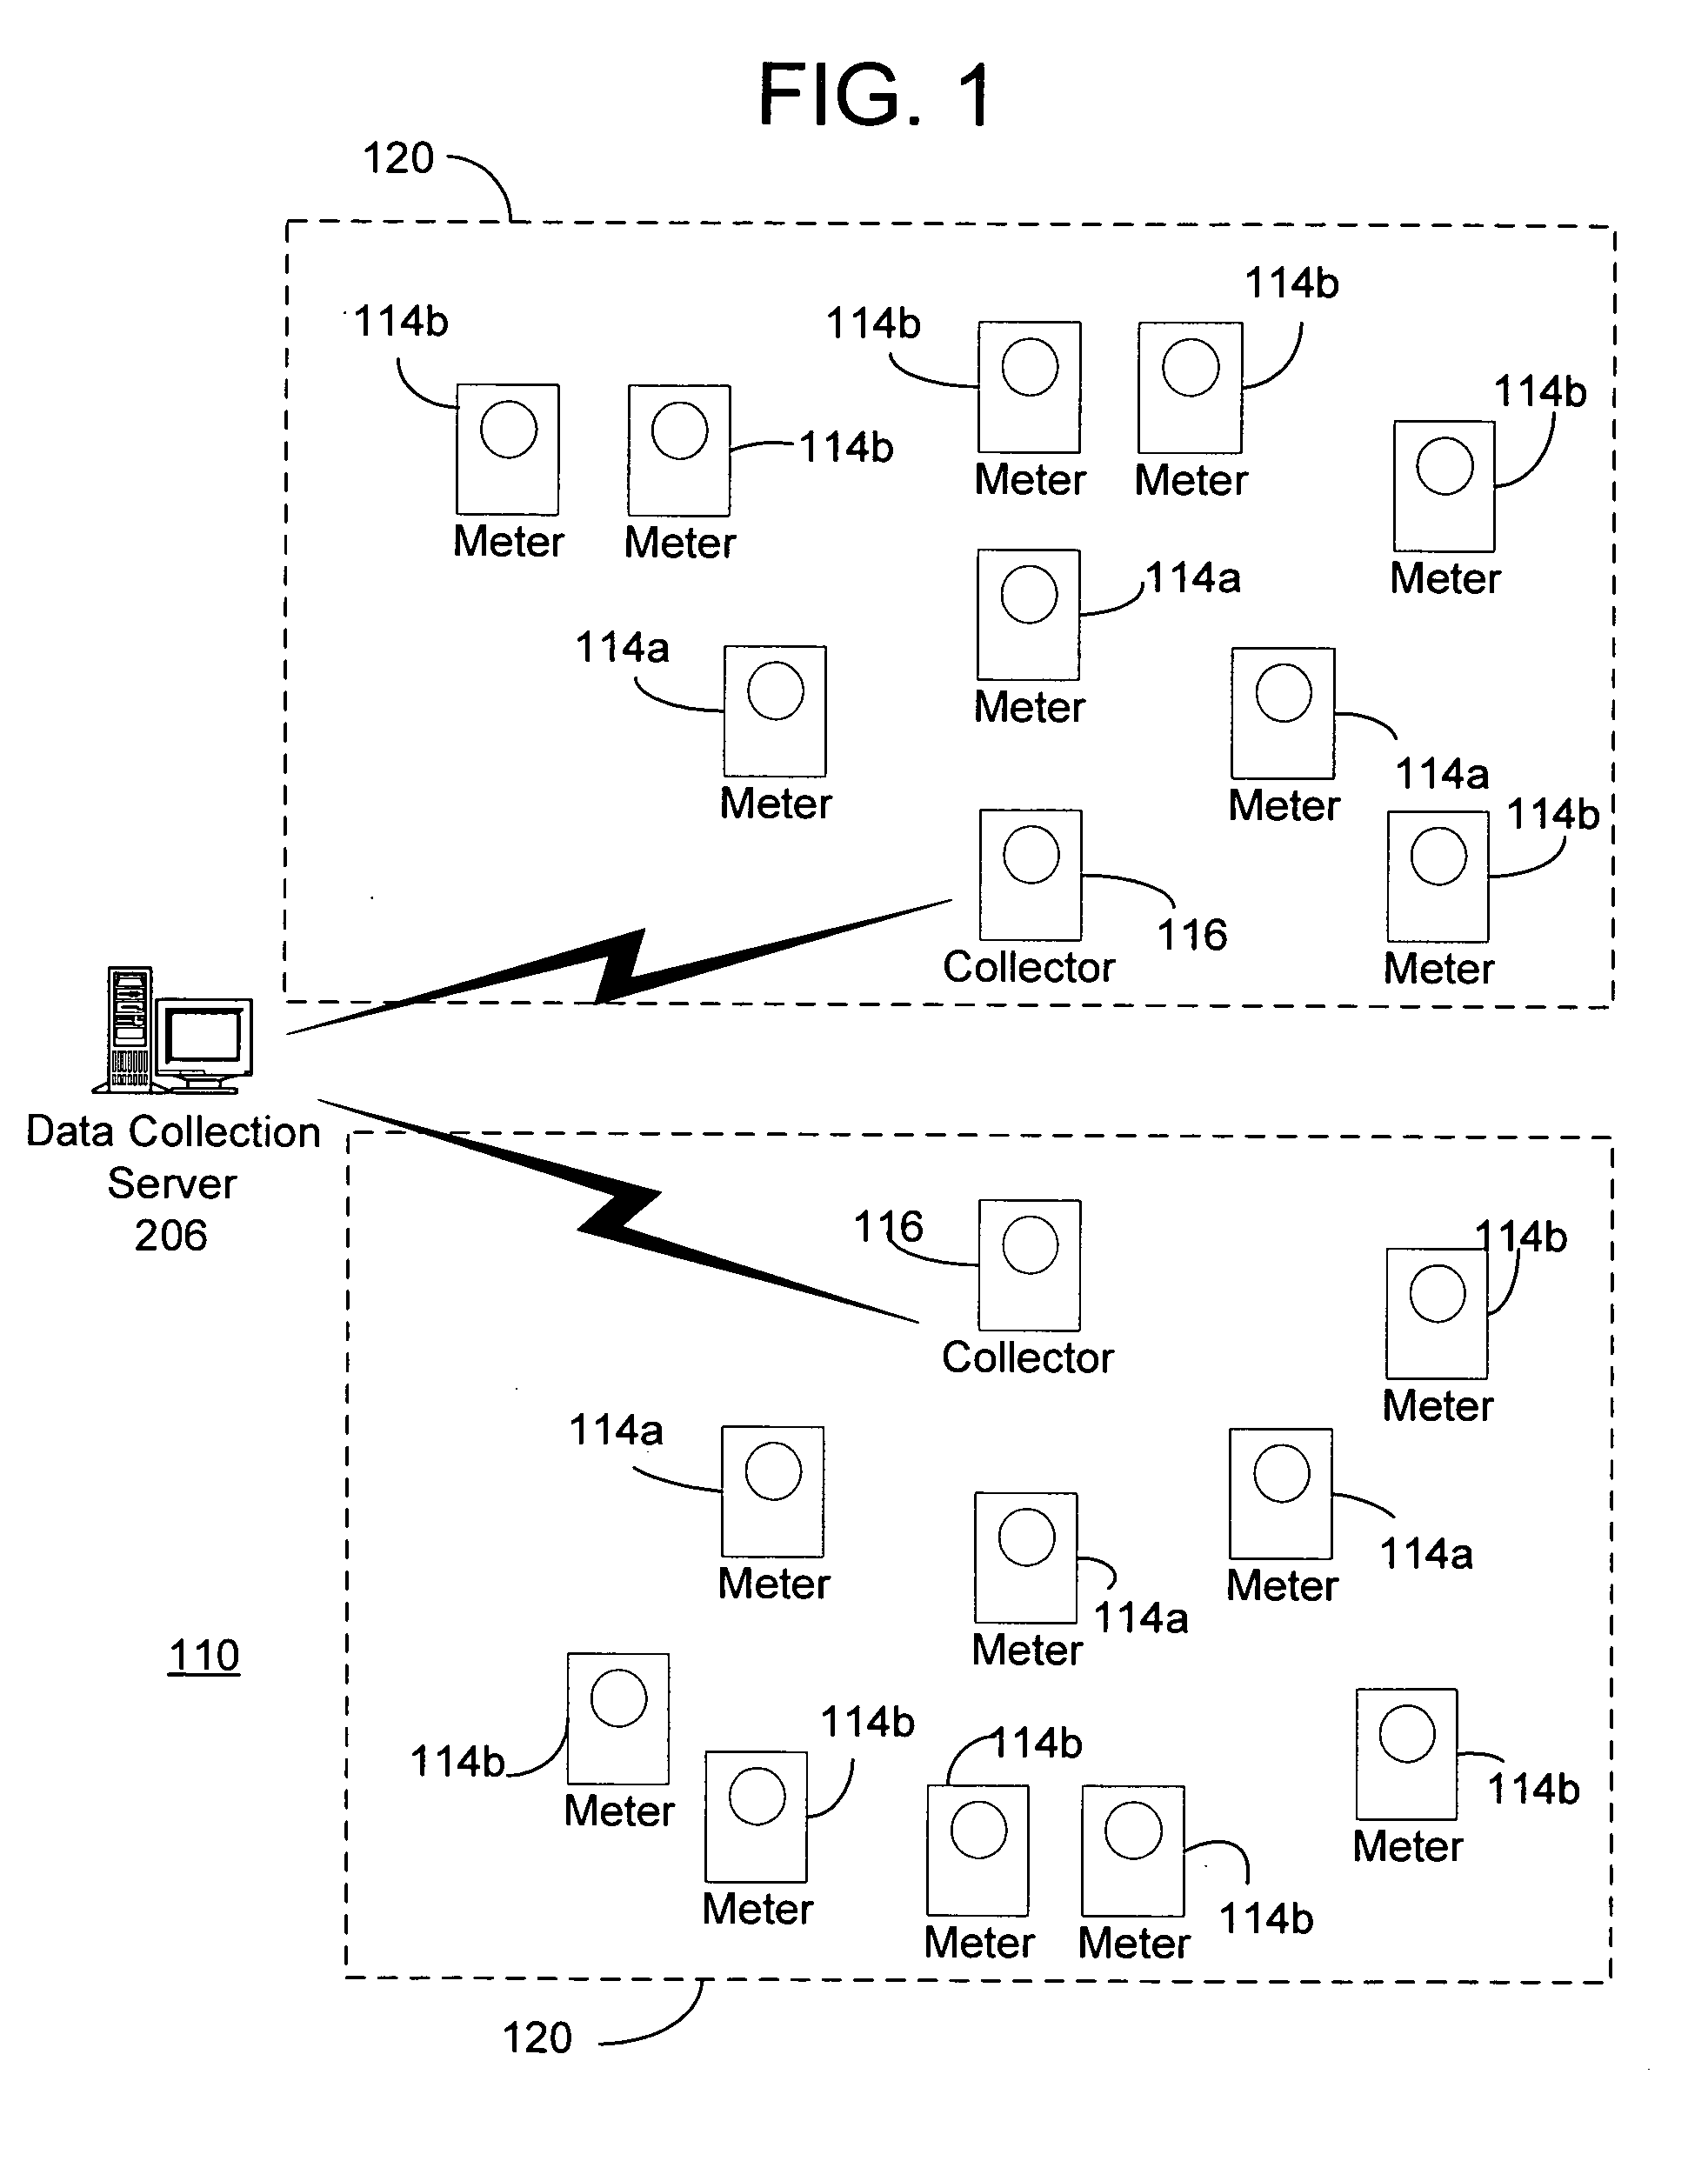 In-home display that communicates with a fixed network meter reading system